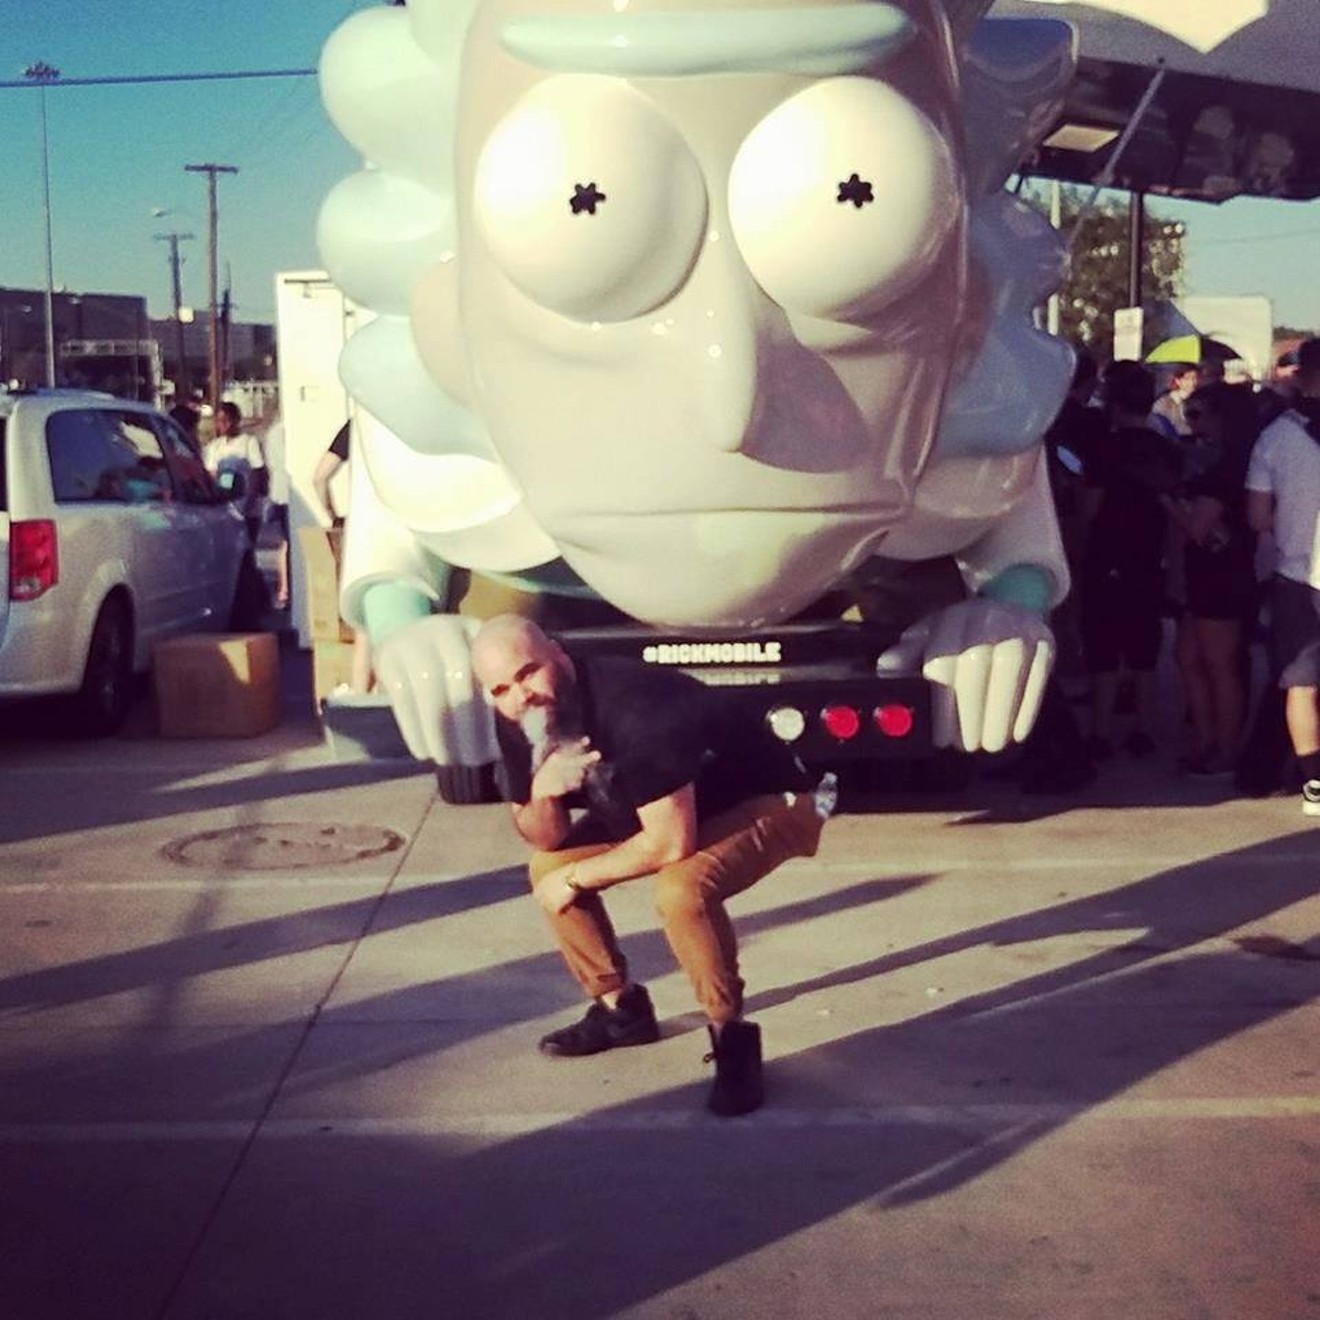 Yung Cloud got Scwhifty at the Rick and Morty event at Alamo Drafthouse on Monday.